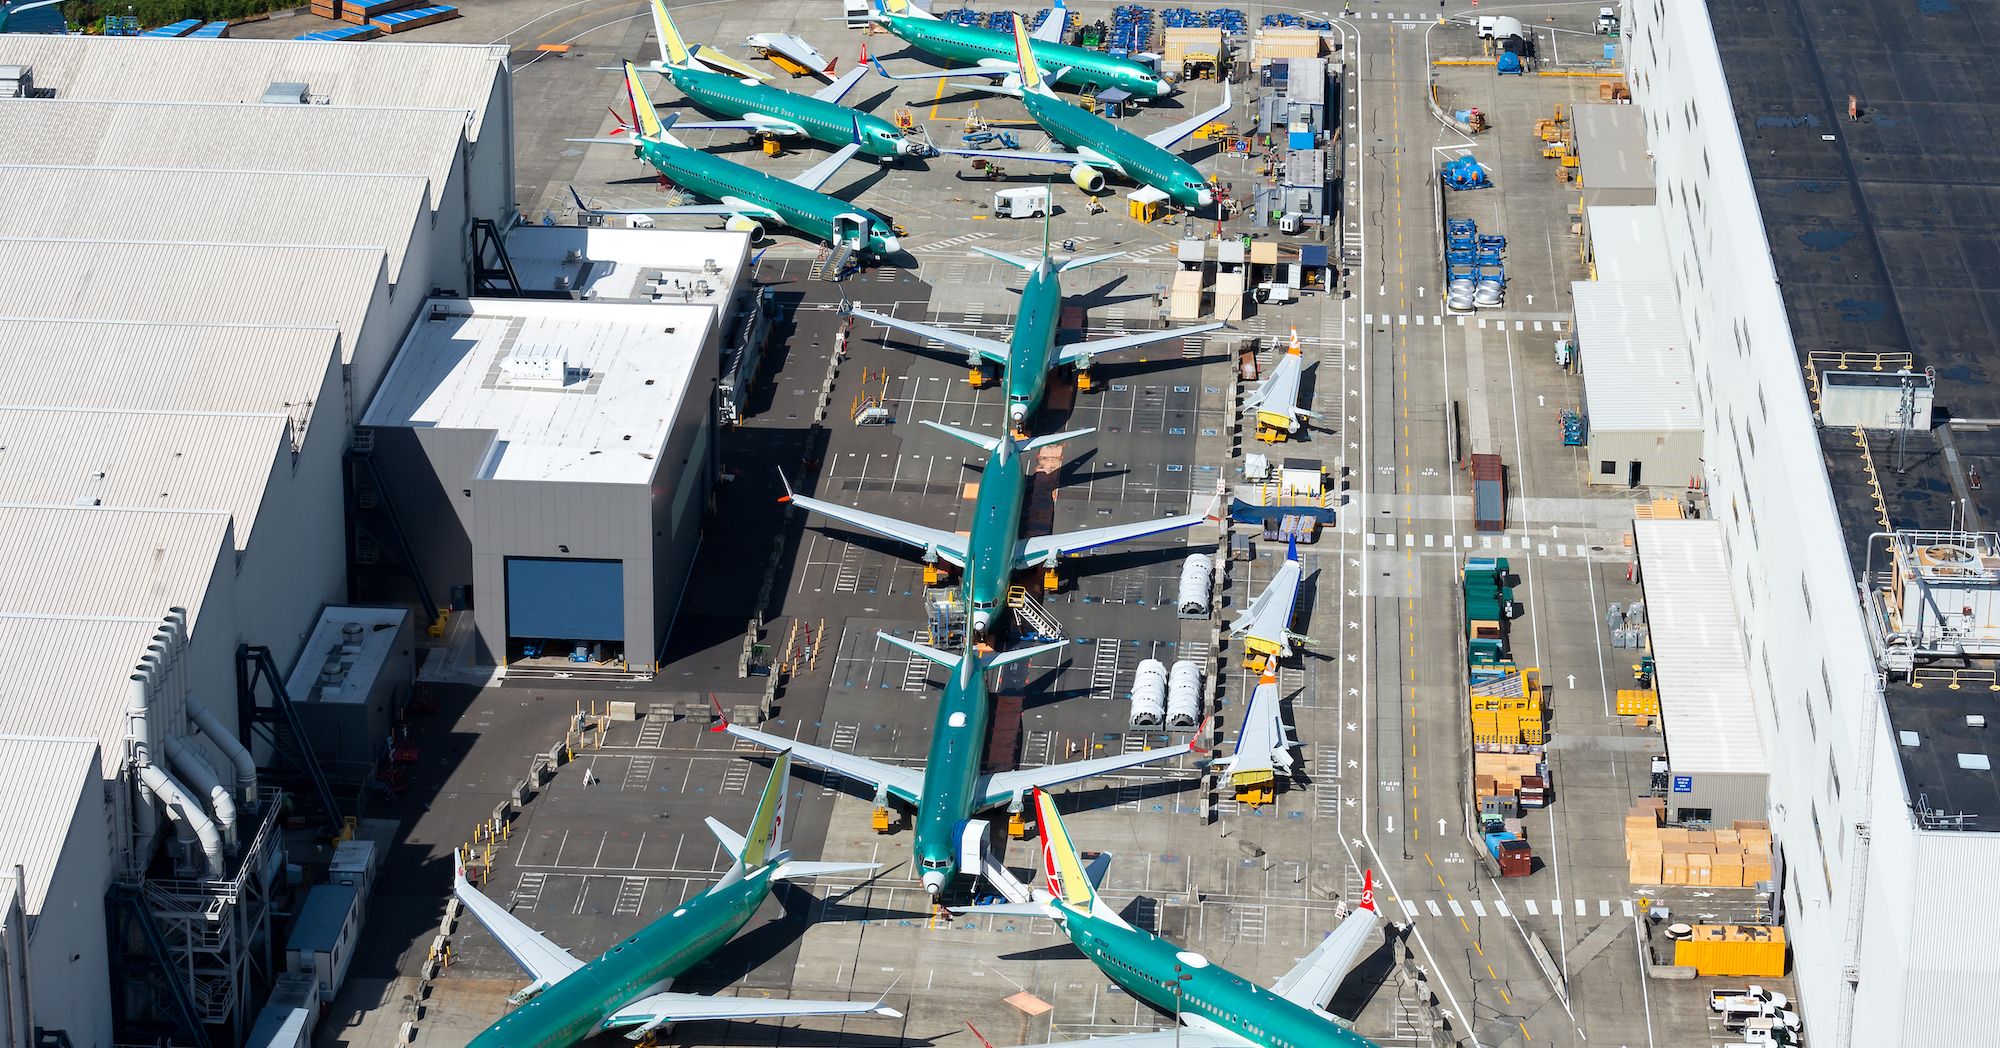 Aerial view of unfinished boeing 737s